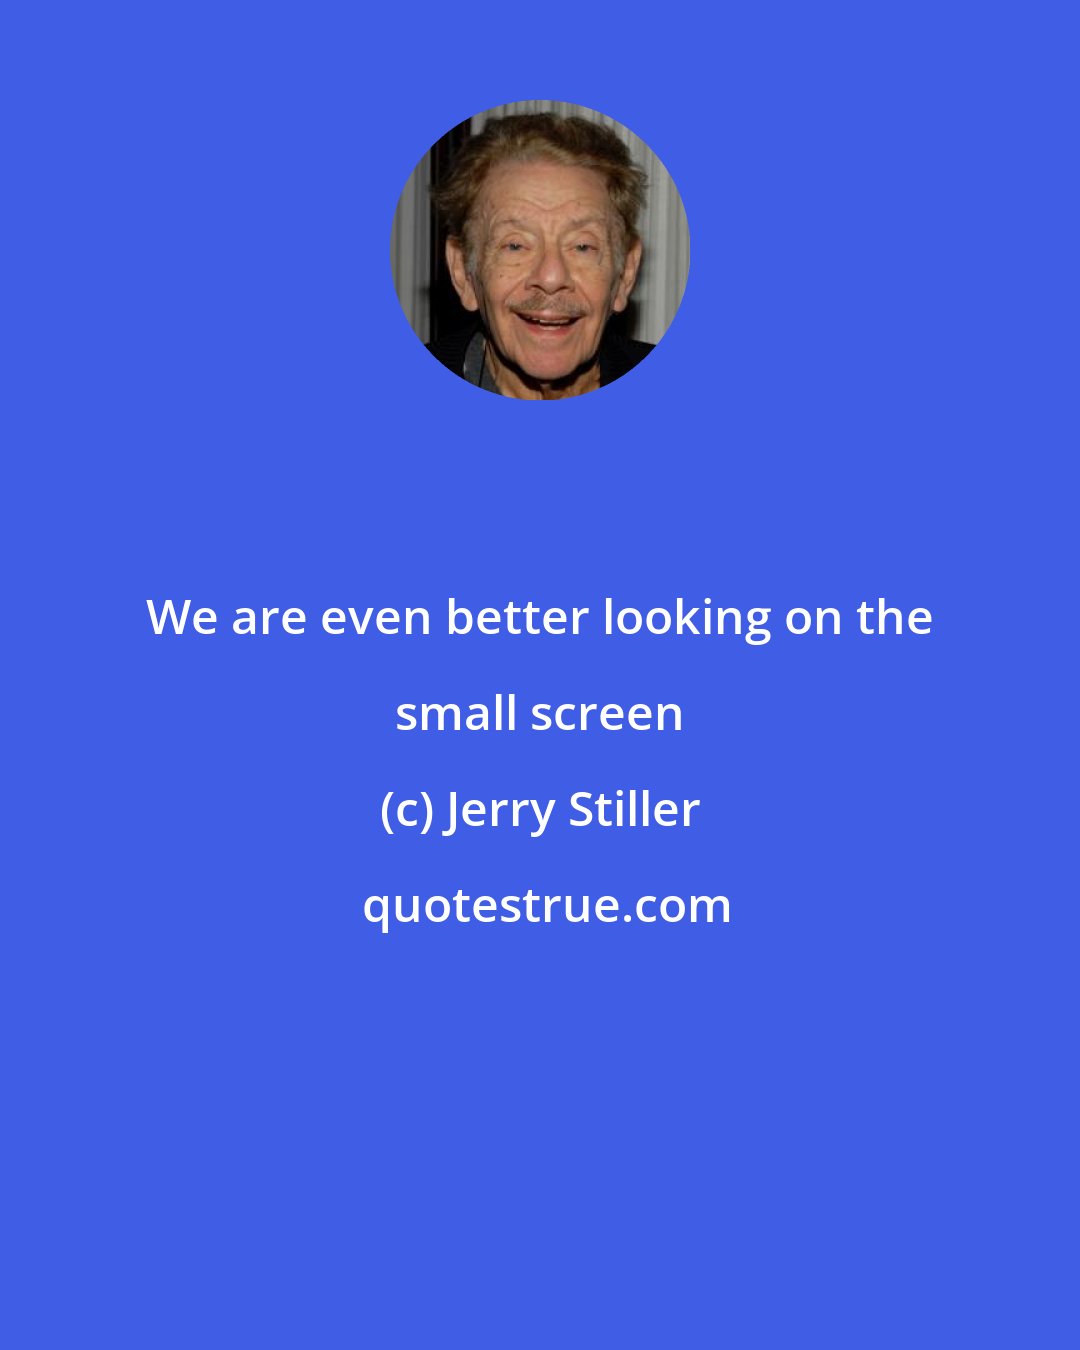 Jerry Stiller: We are even better looking on the small screen